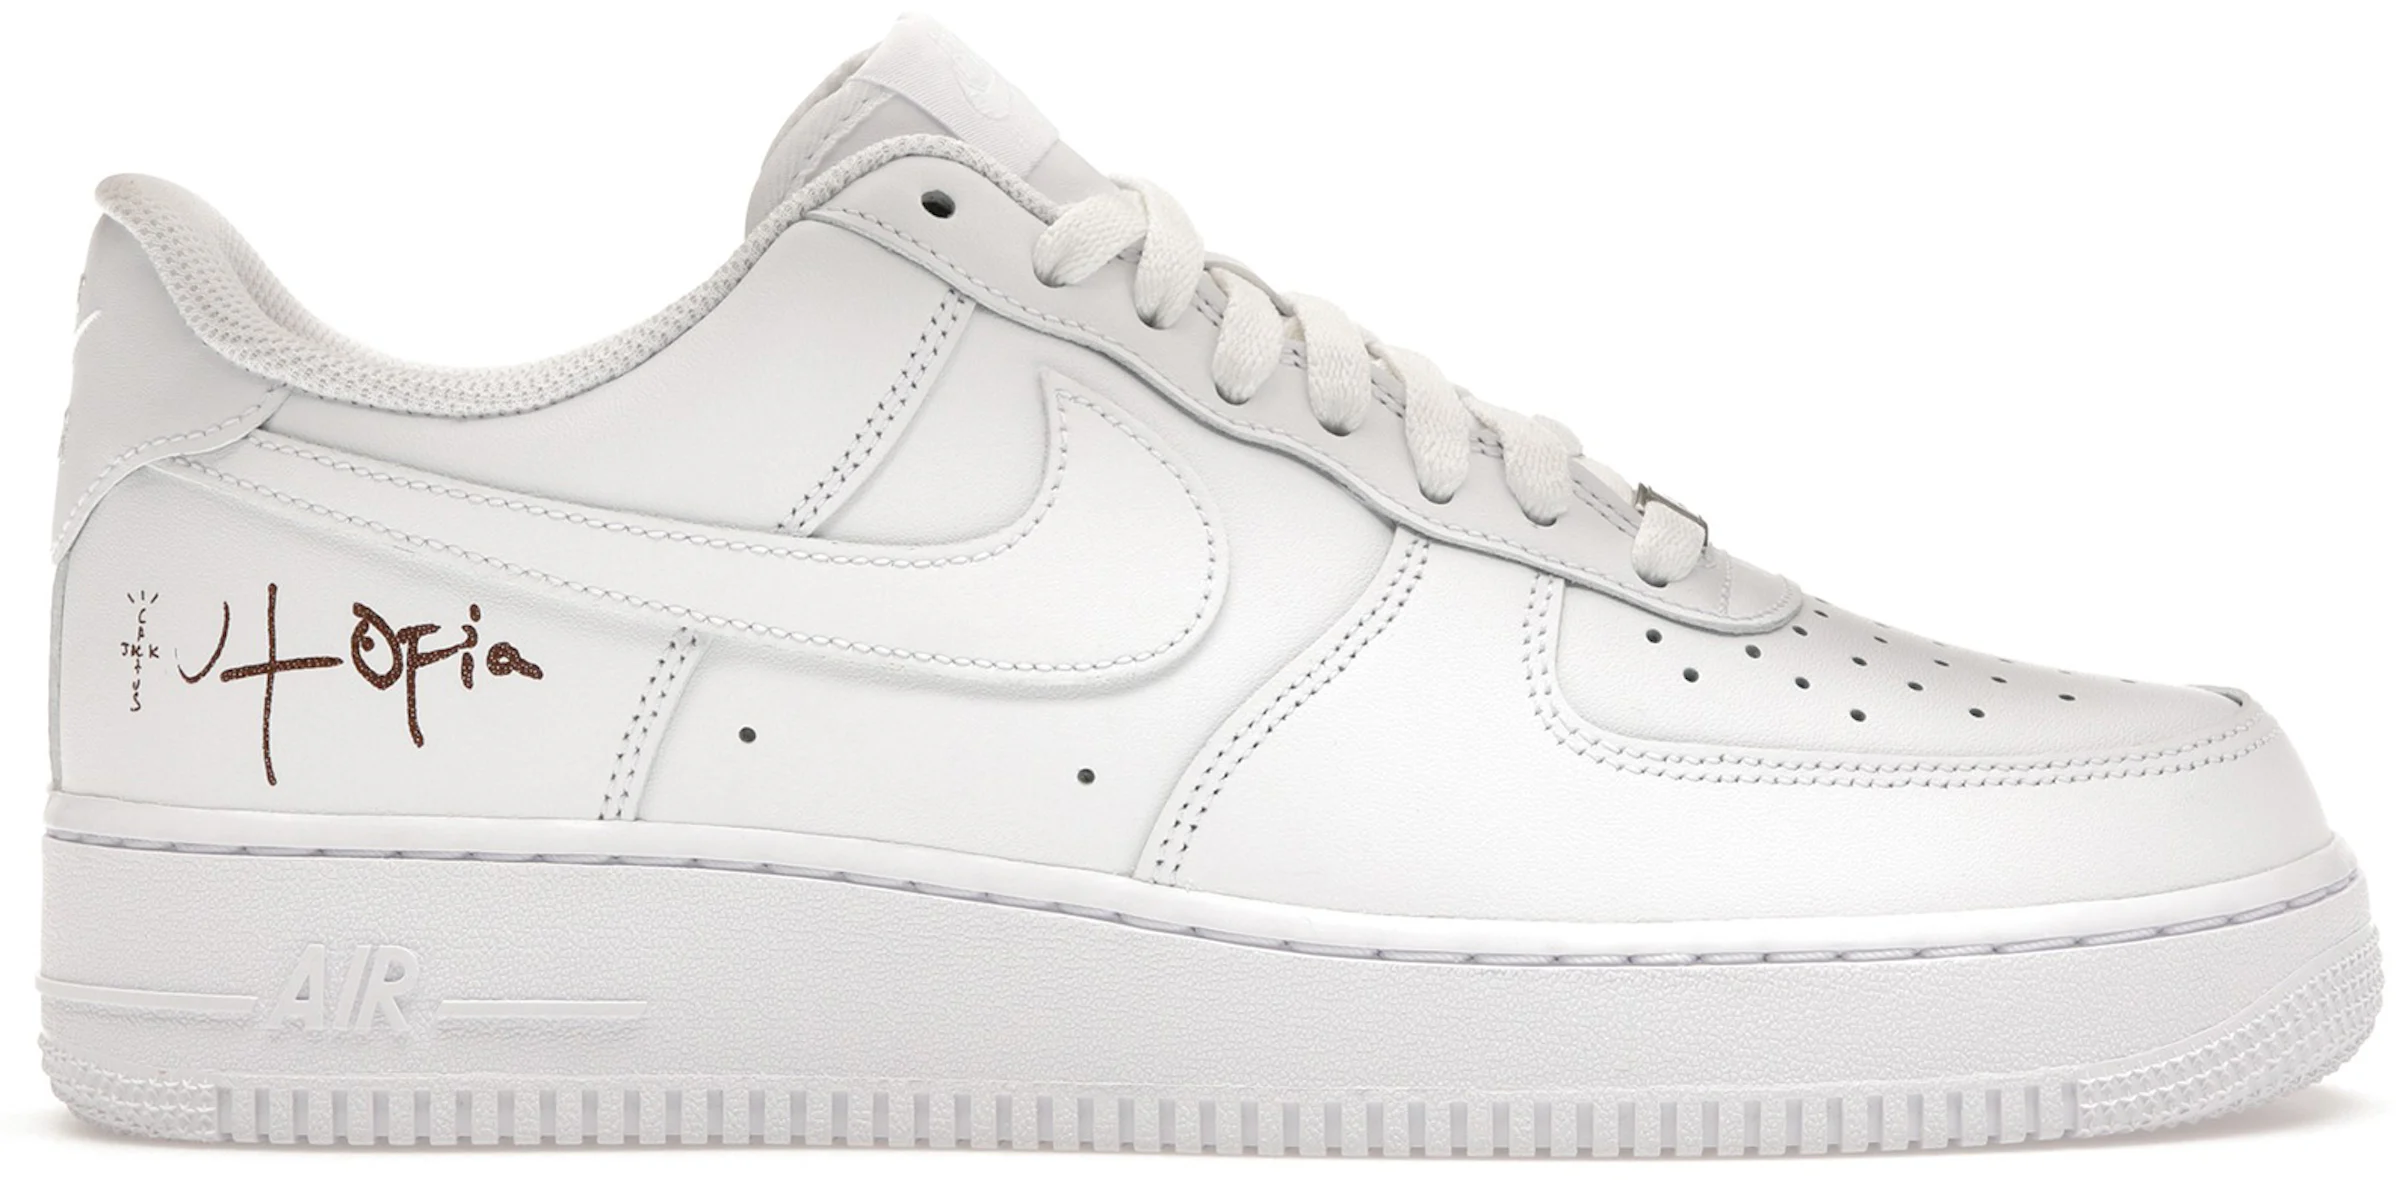 Nike Air Force 1: The Buyer's Guide - StockX News